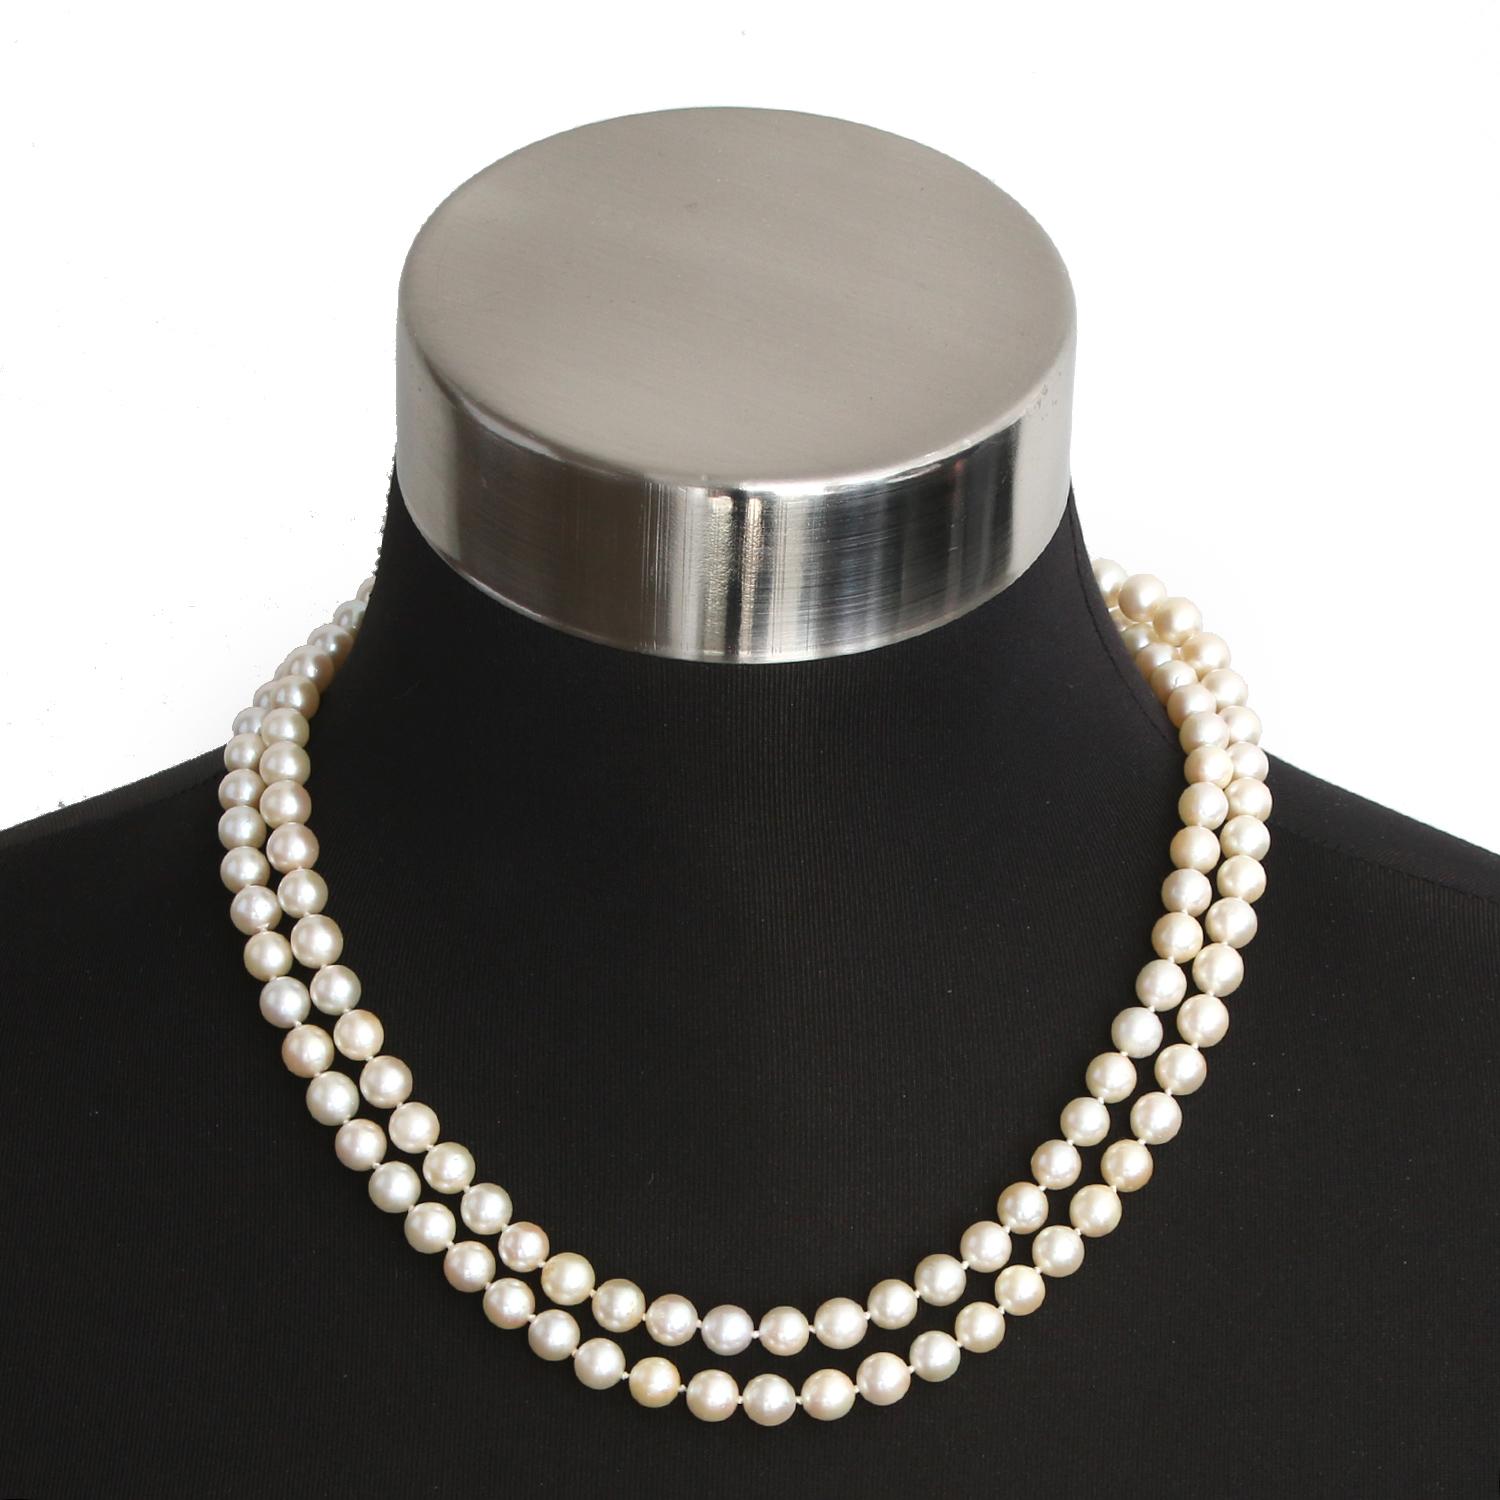 Double Strand Salt Water Pearl Necklace & Bracelet  - Double strand of pearls measuring 7mm each pearl. Total length 19 inches long with a 14K white gold clasp. Bracelet measured 7 mm each pearl and has a 6 inch wrist. Pre-owned .